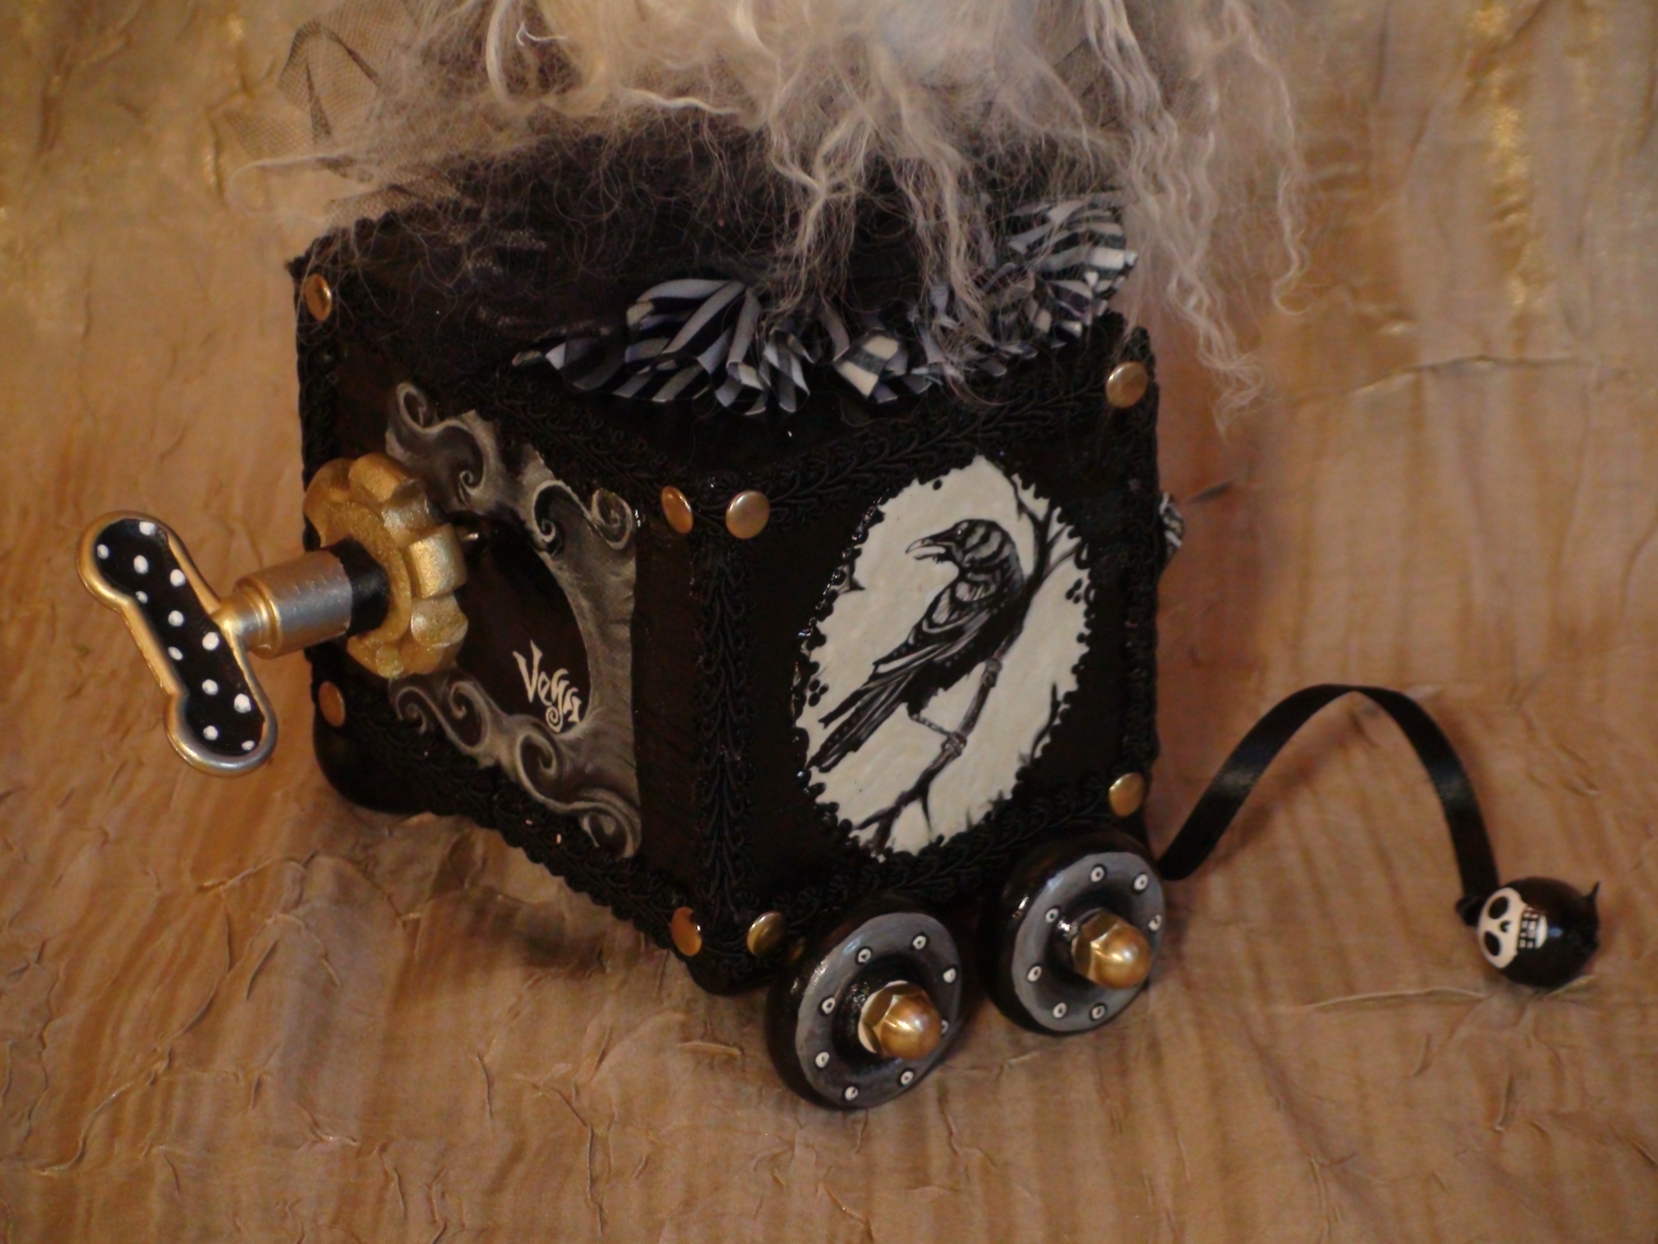 close-up of wind-up pull-cart toy music box raven hand-painted on the side